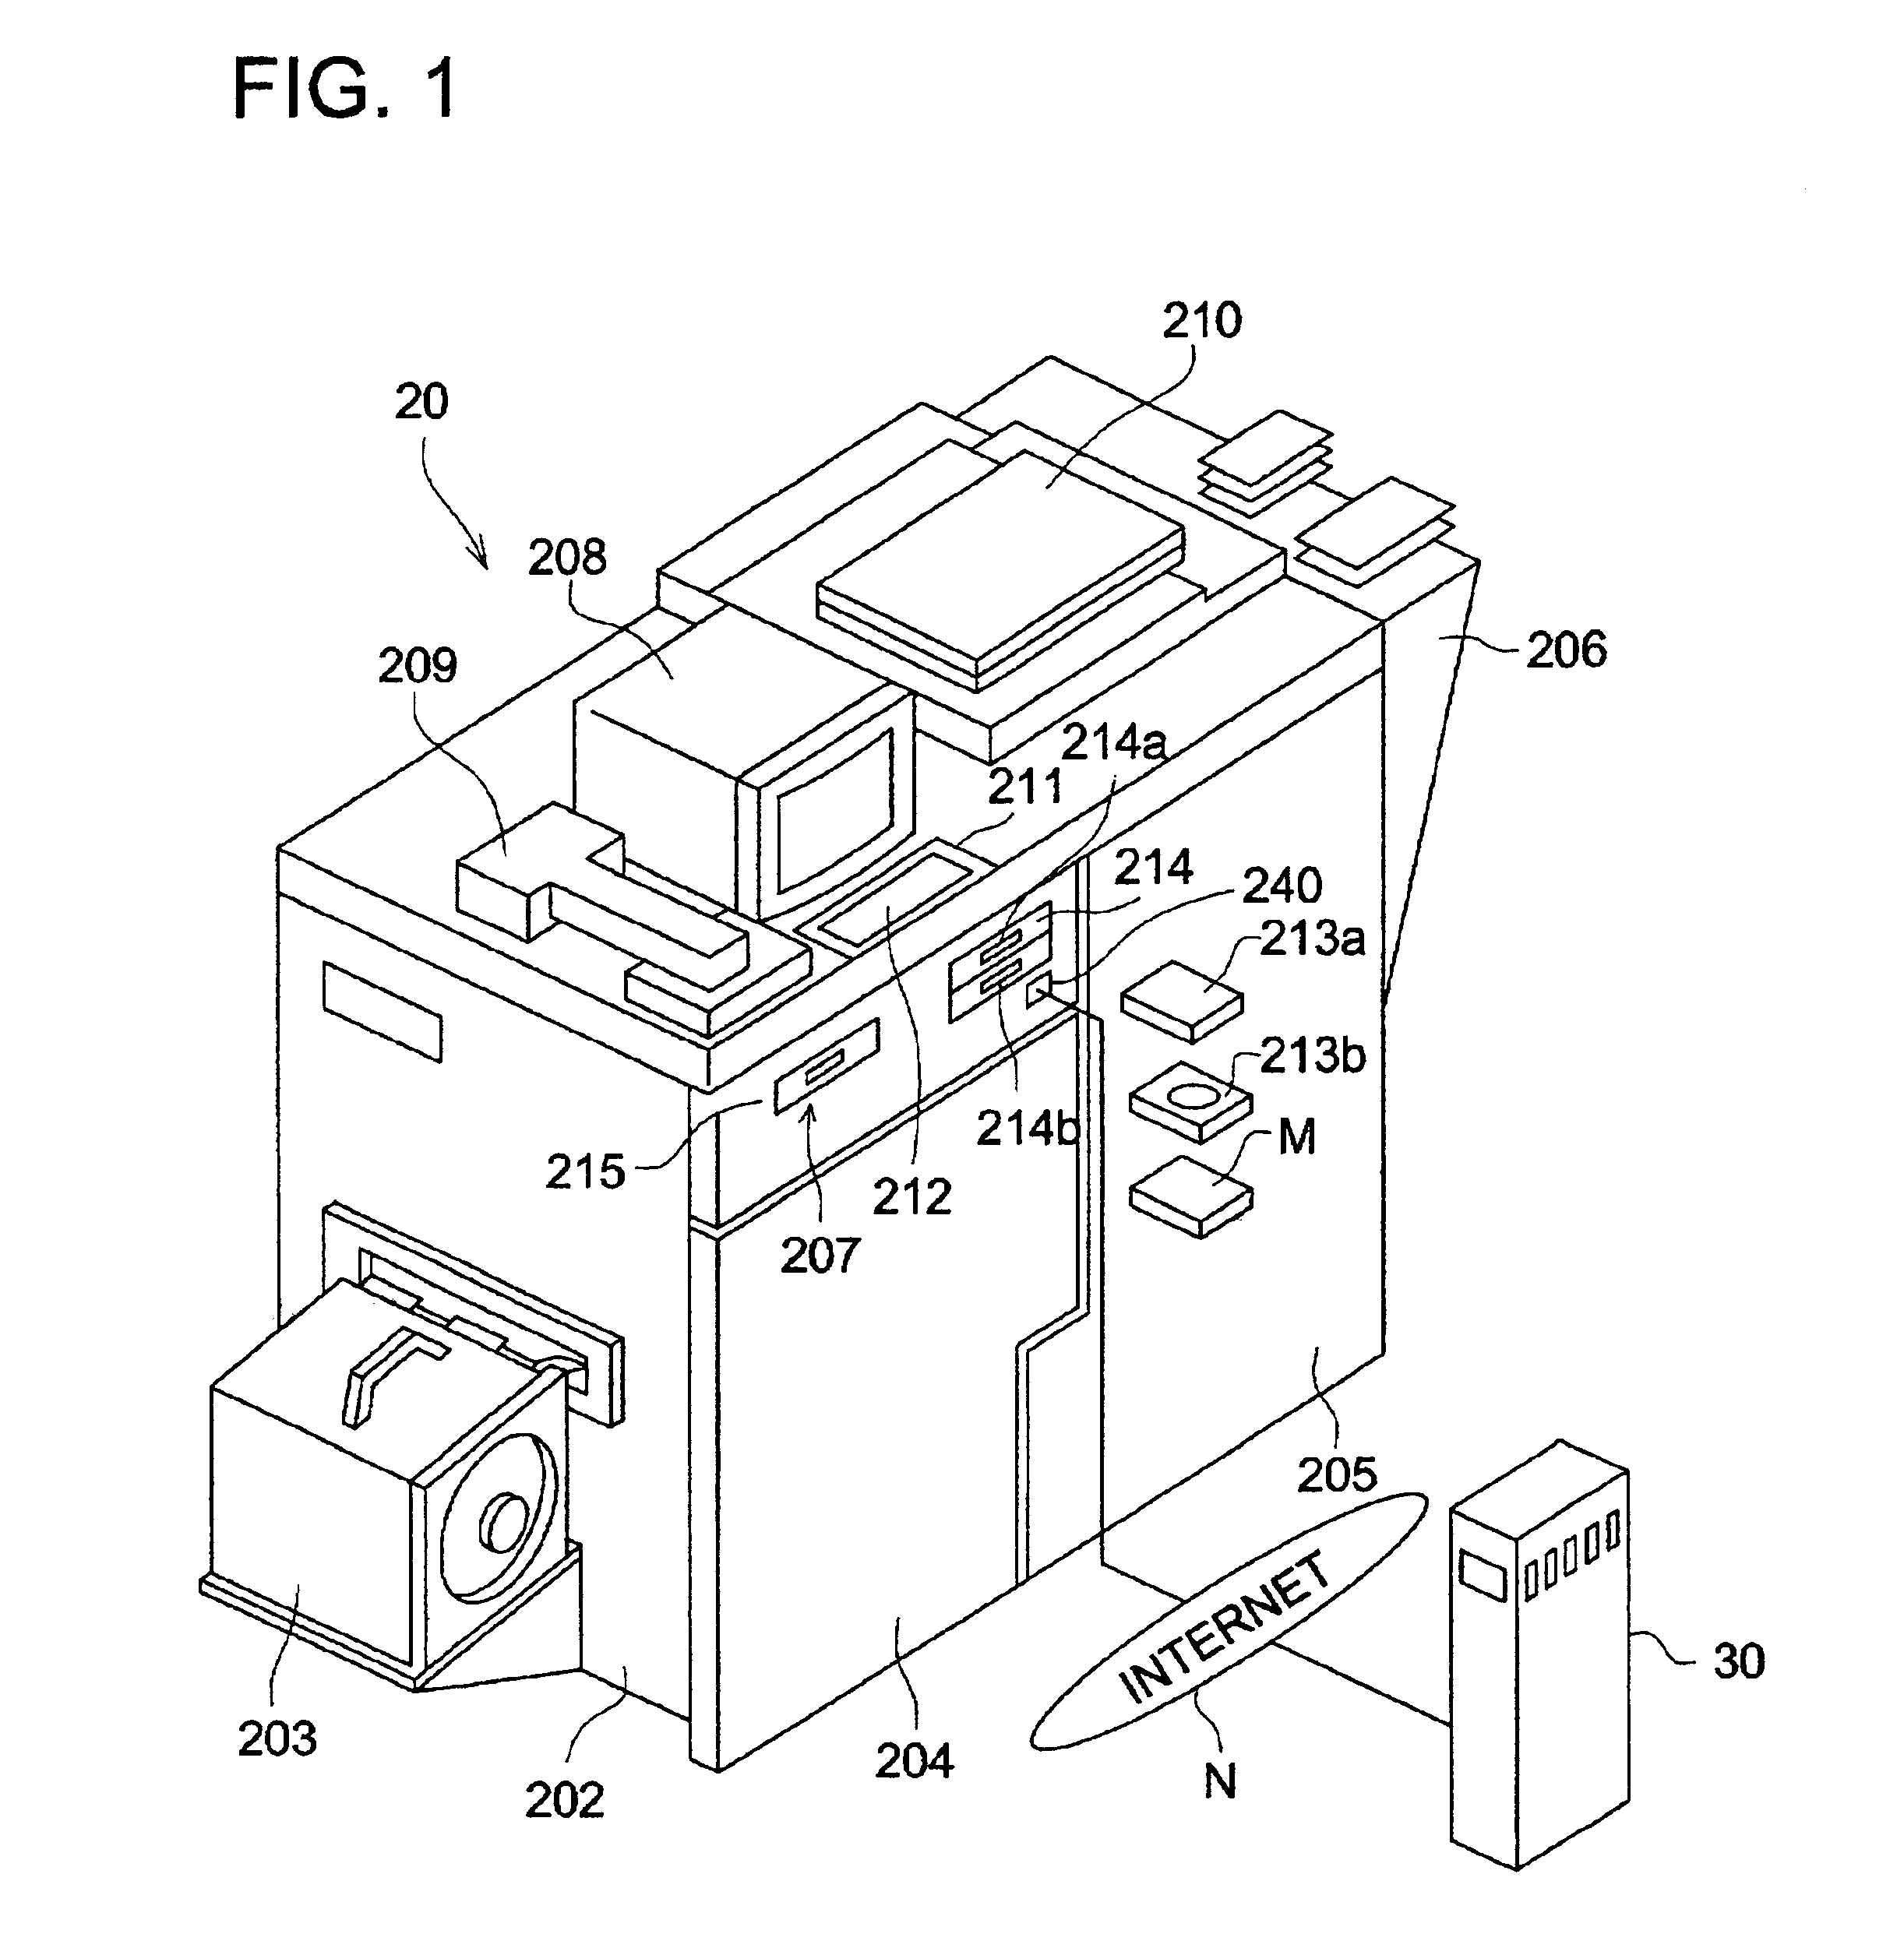 Method for producing a print having a visual image and specific printed information